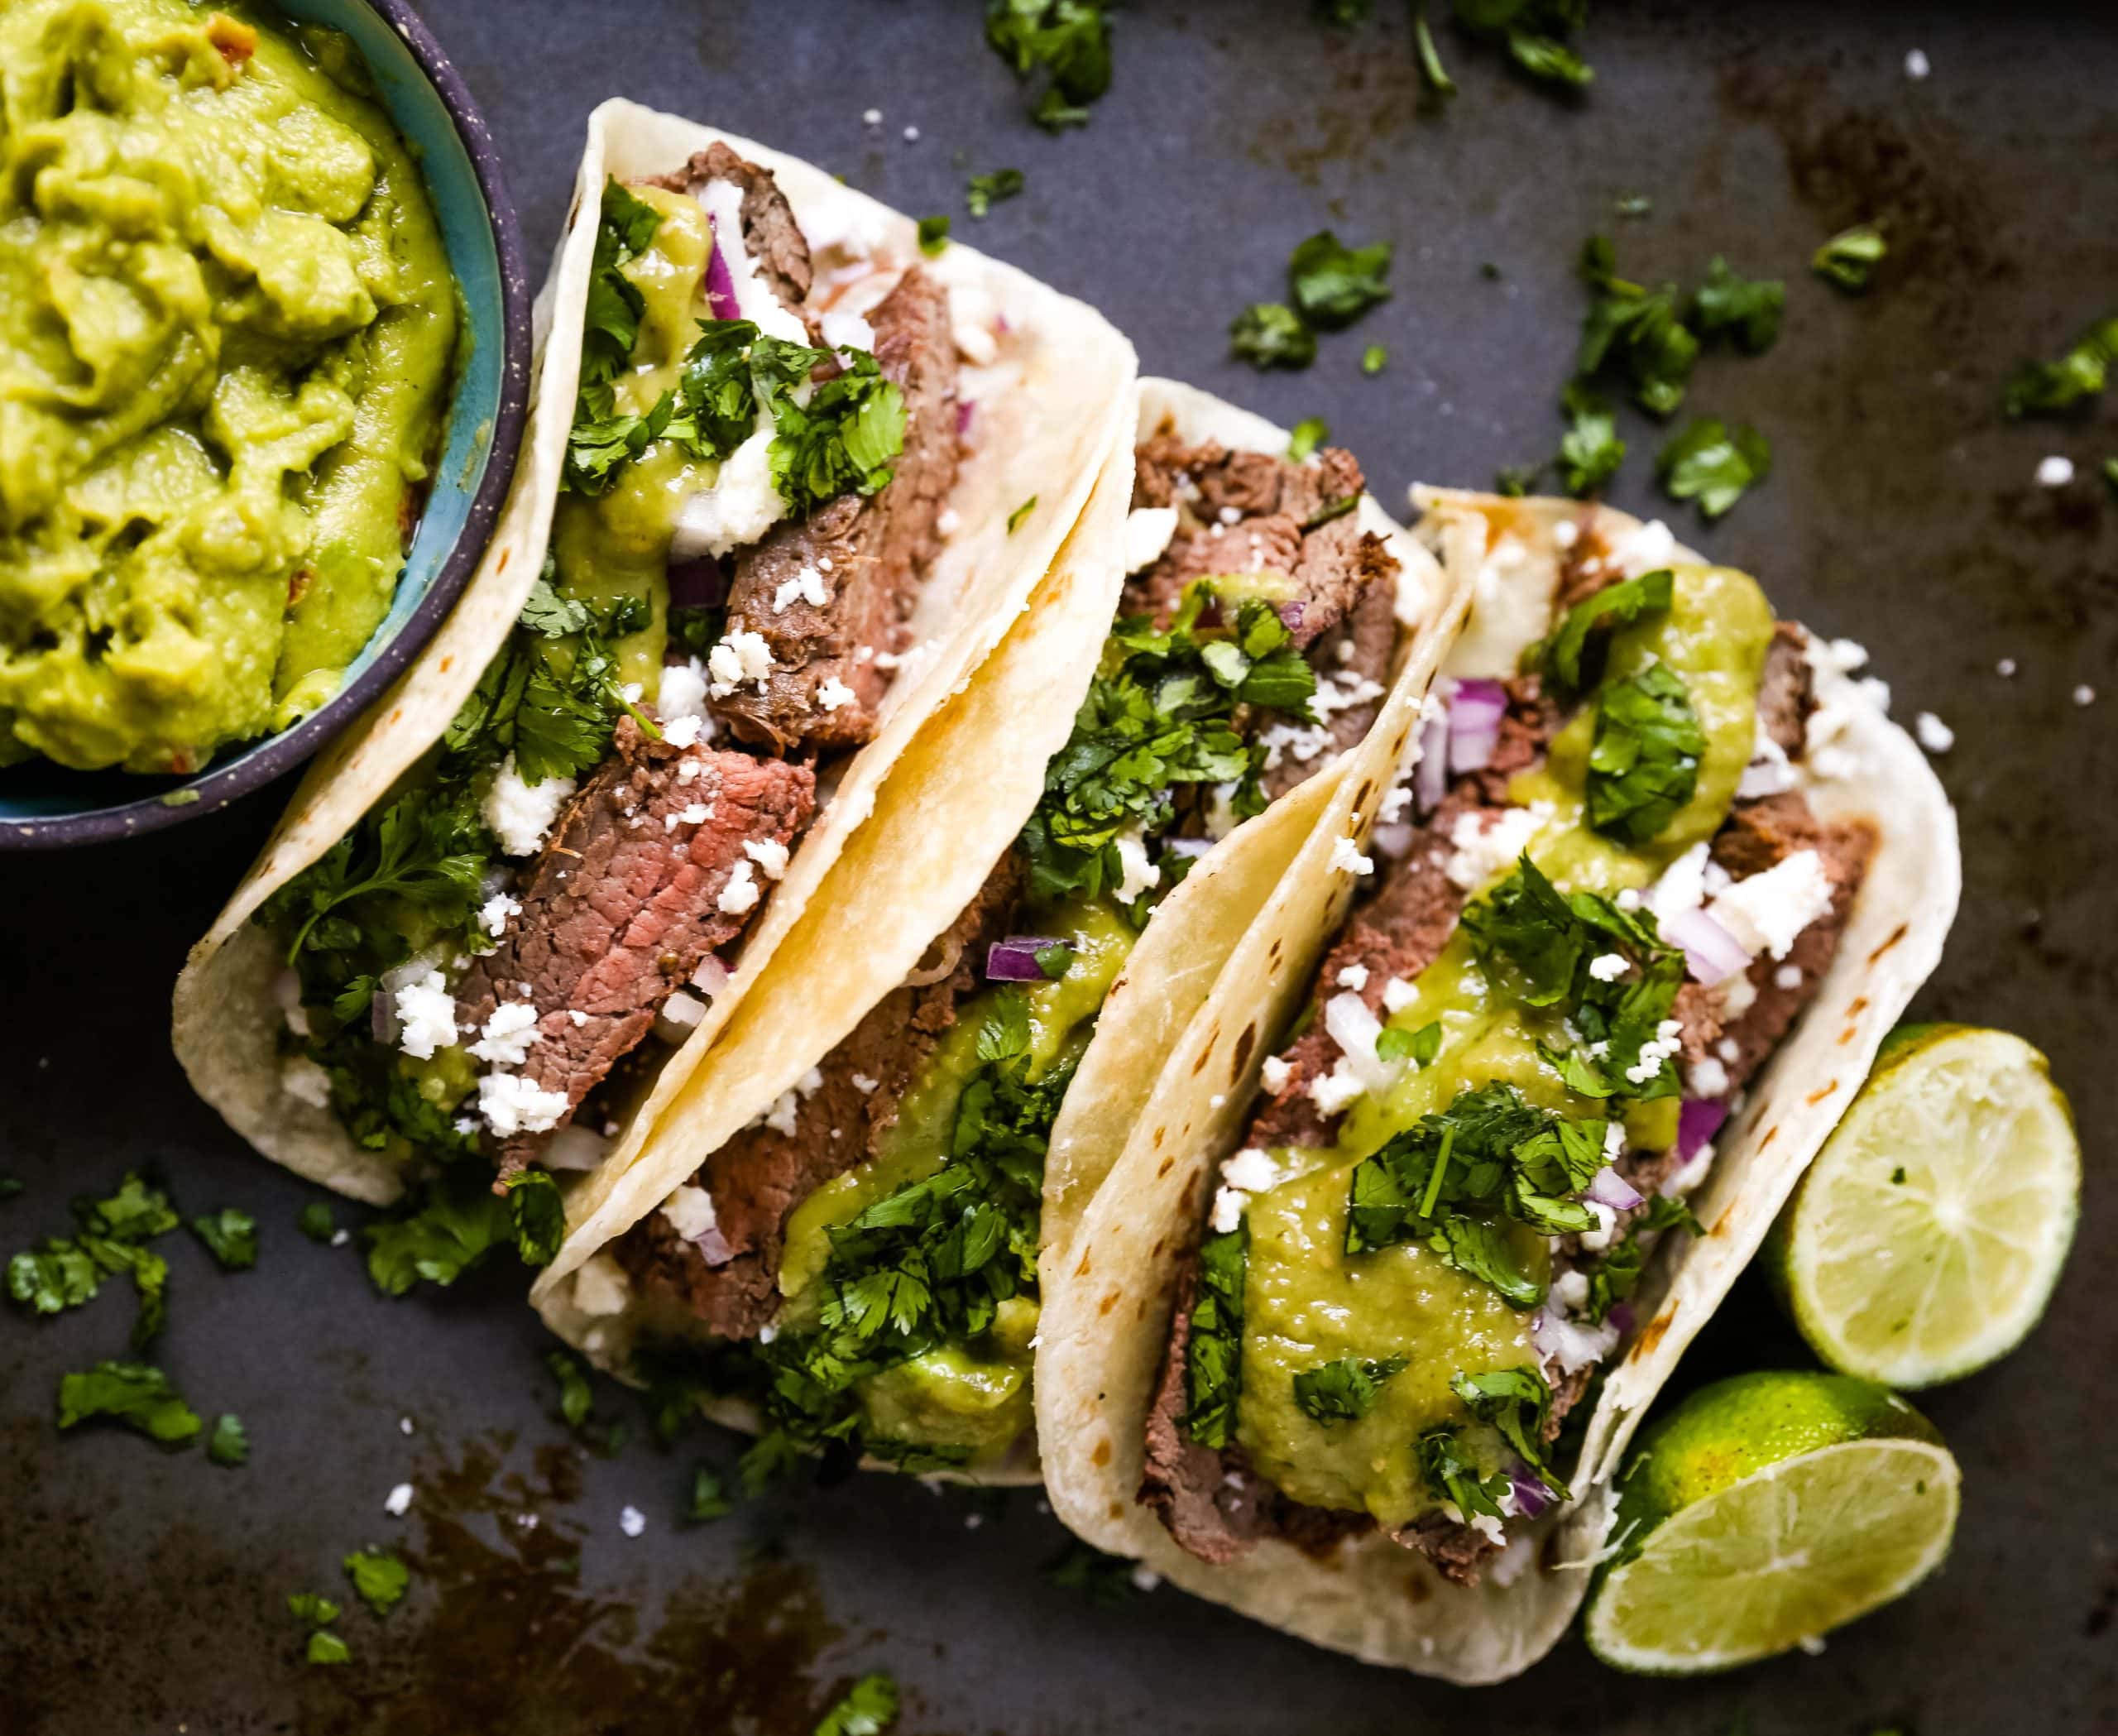 Grilled Steak Tacos. Juicy marinated grilled steak tacos with fresh cilantro, avocado, and salsa. The most flavorful and tender steak tacos recipe! www.modernhoney.com #tacos #steaktacos #steak #beeftacos